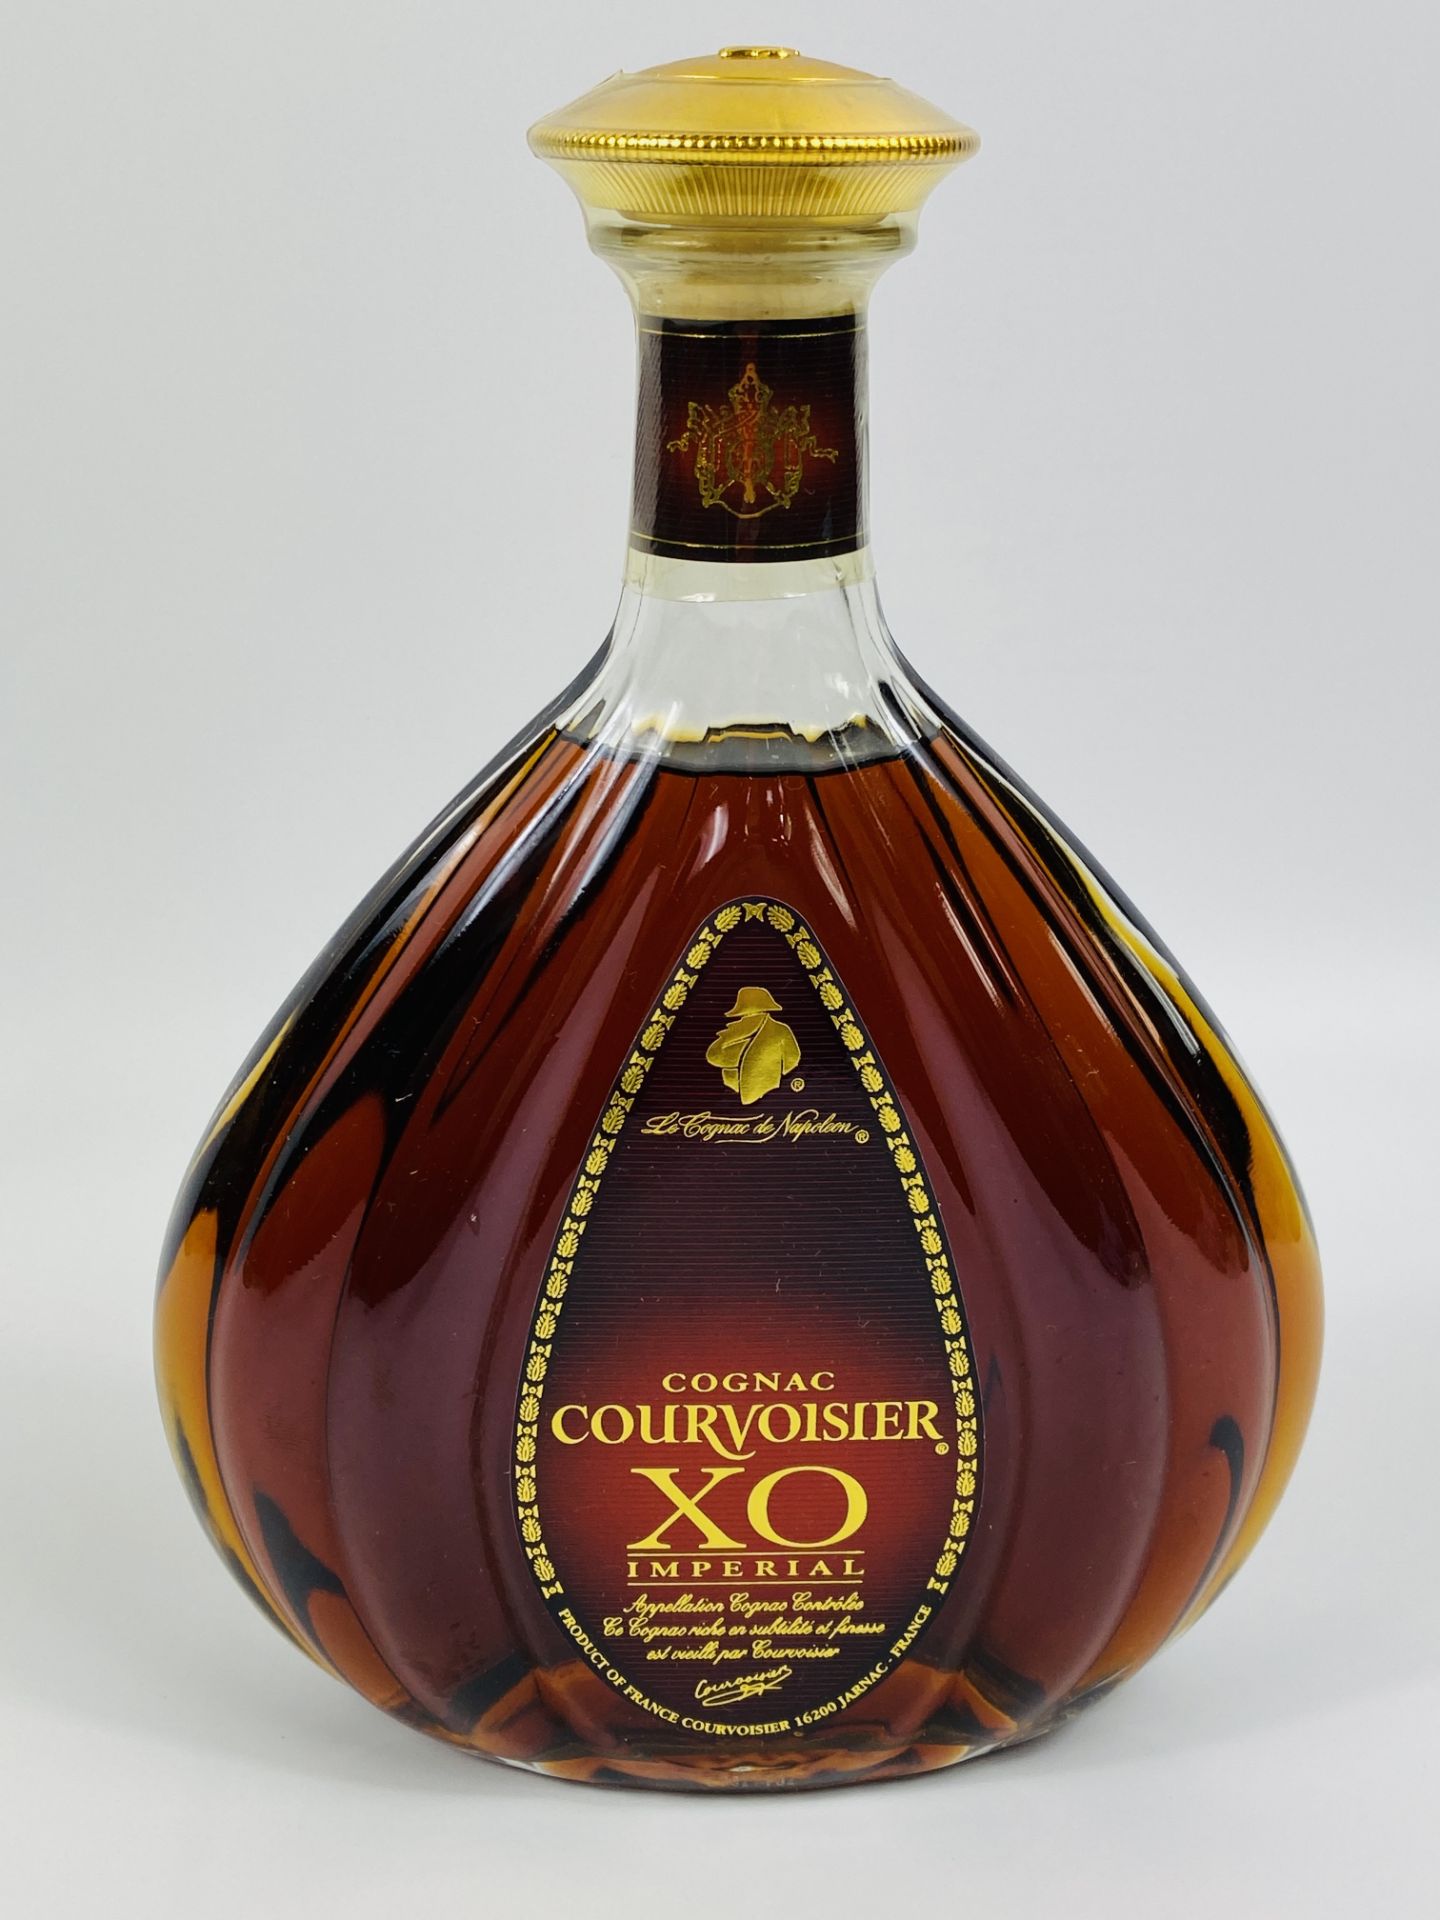 70cl bottle of Cognac Courvoisier XO Imperial in presentation box - Image 2 of 4